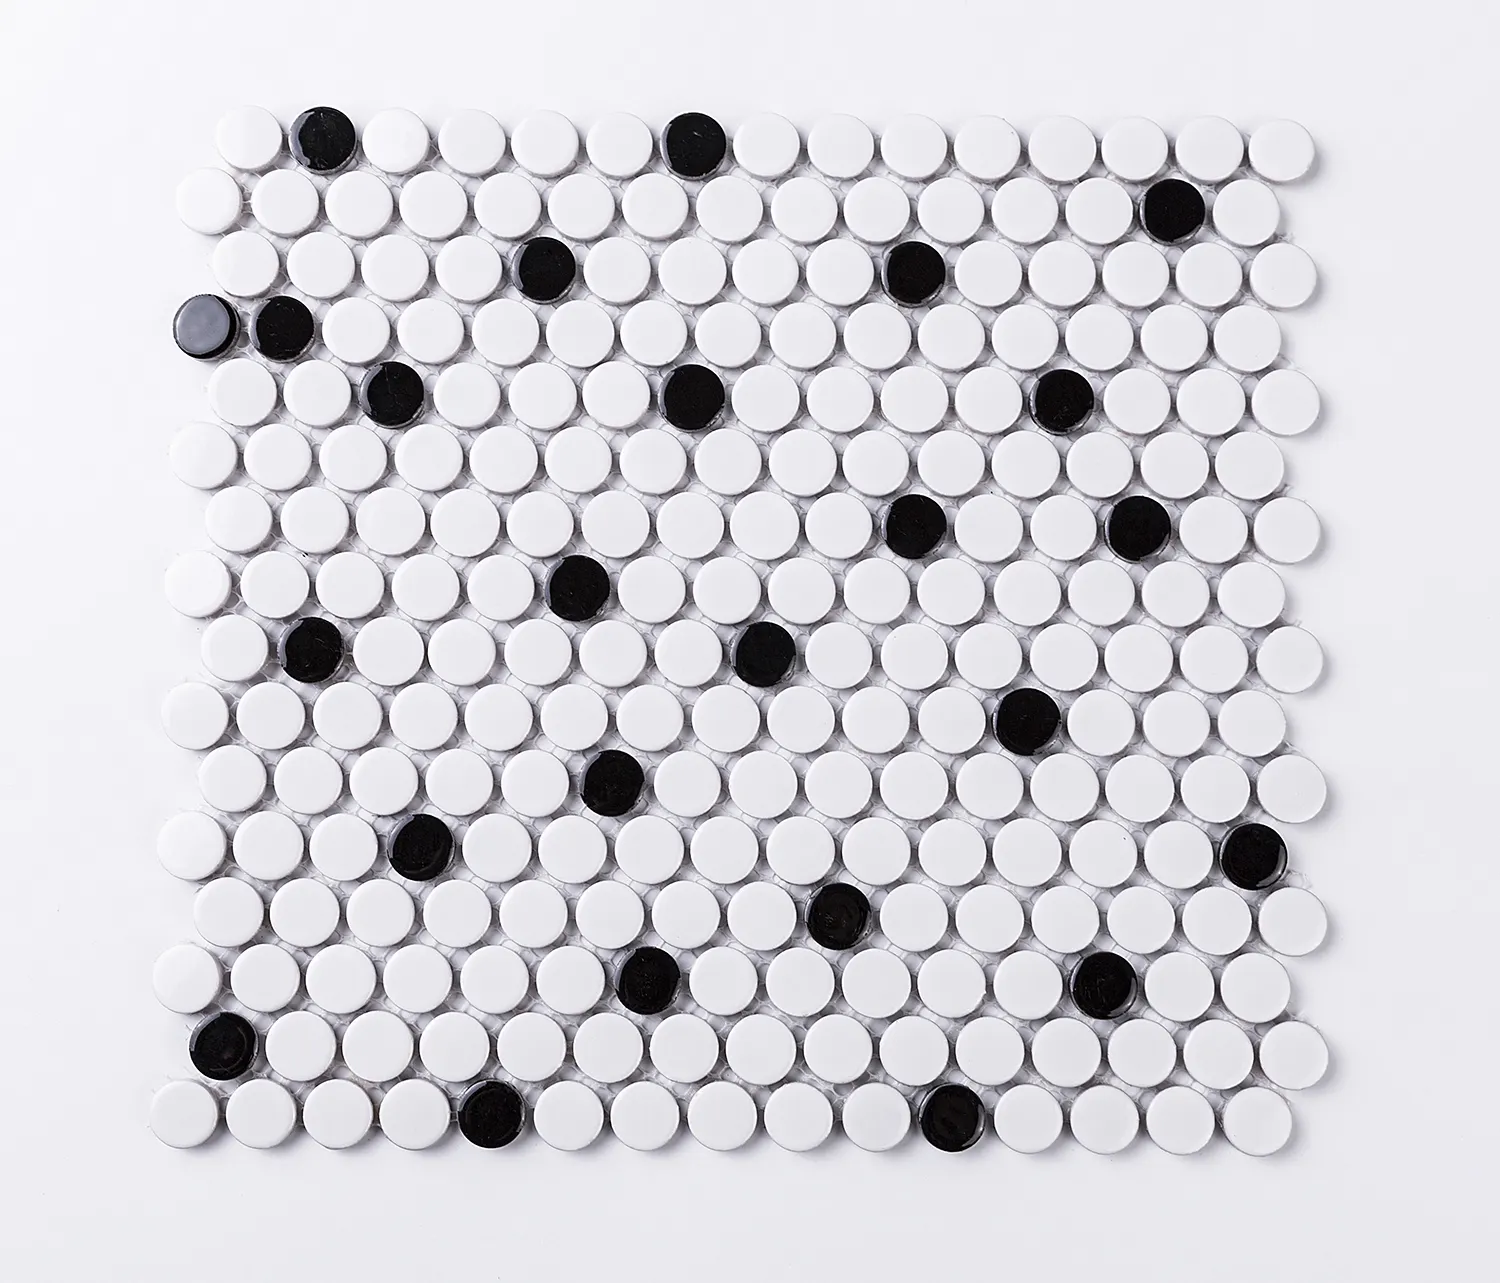 Century Mosaic Black And White Ceramic Penny Round Mosaic Glazed Mosaic Tiles For Indoor Wall And Floor